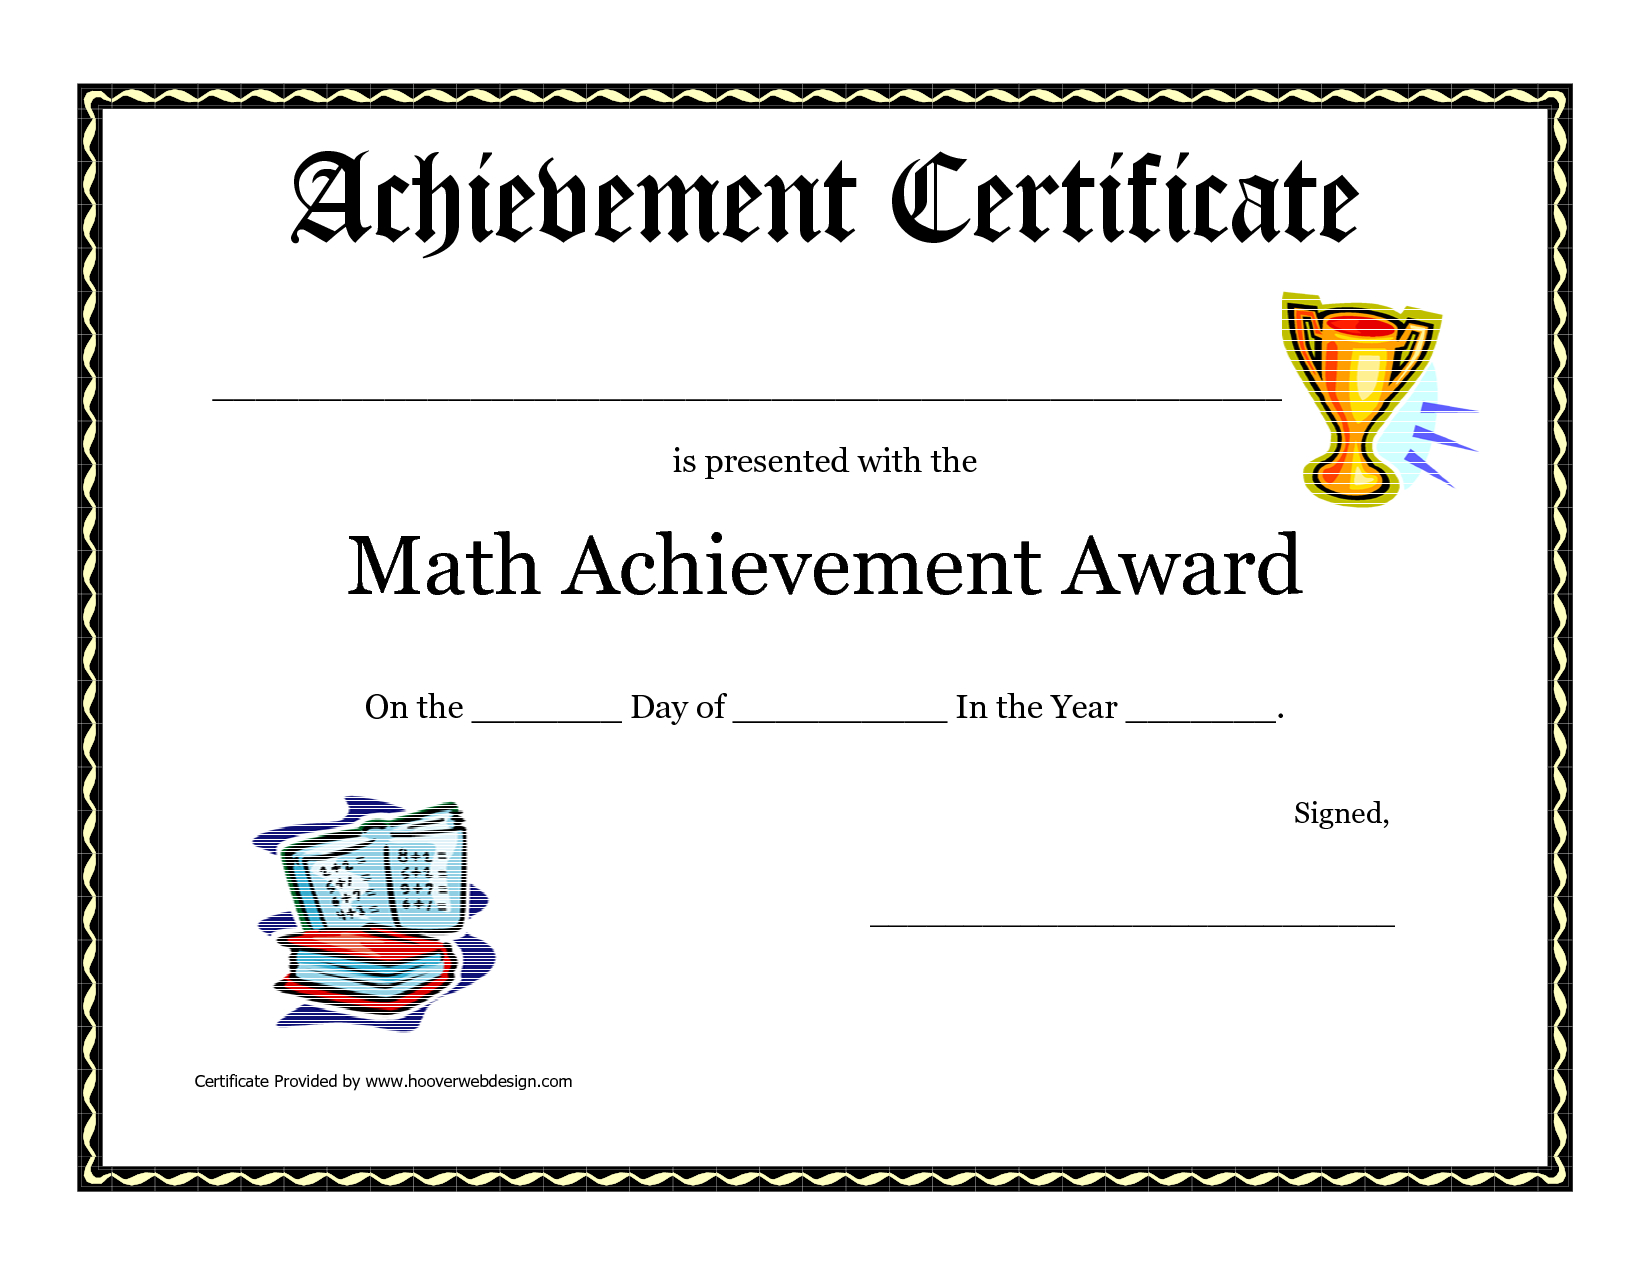 Math Achievement Award Printable Certificate Pdf | Award Inside Free Printable Student Of The Month Certificate Templates